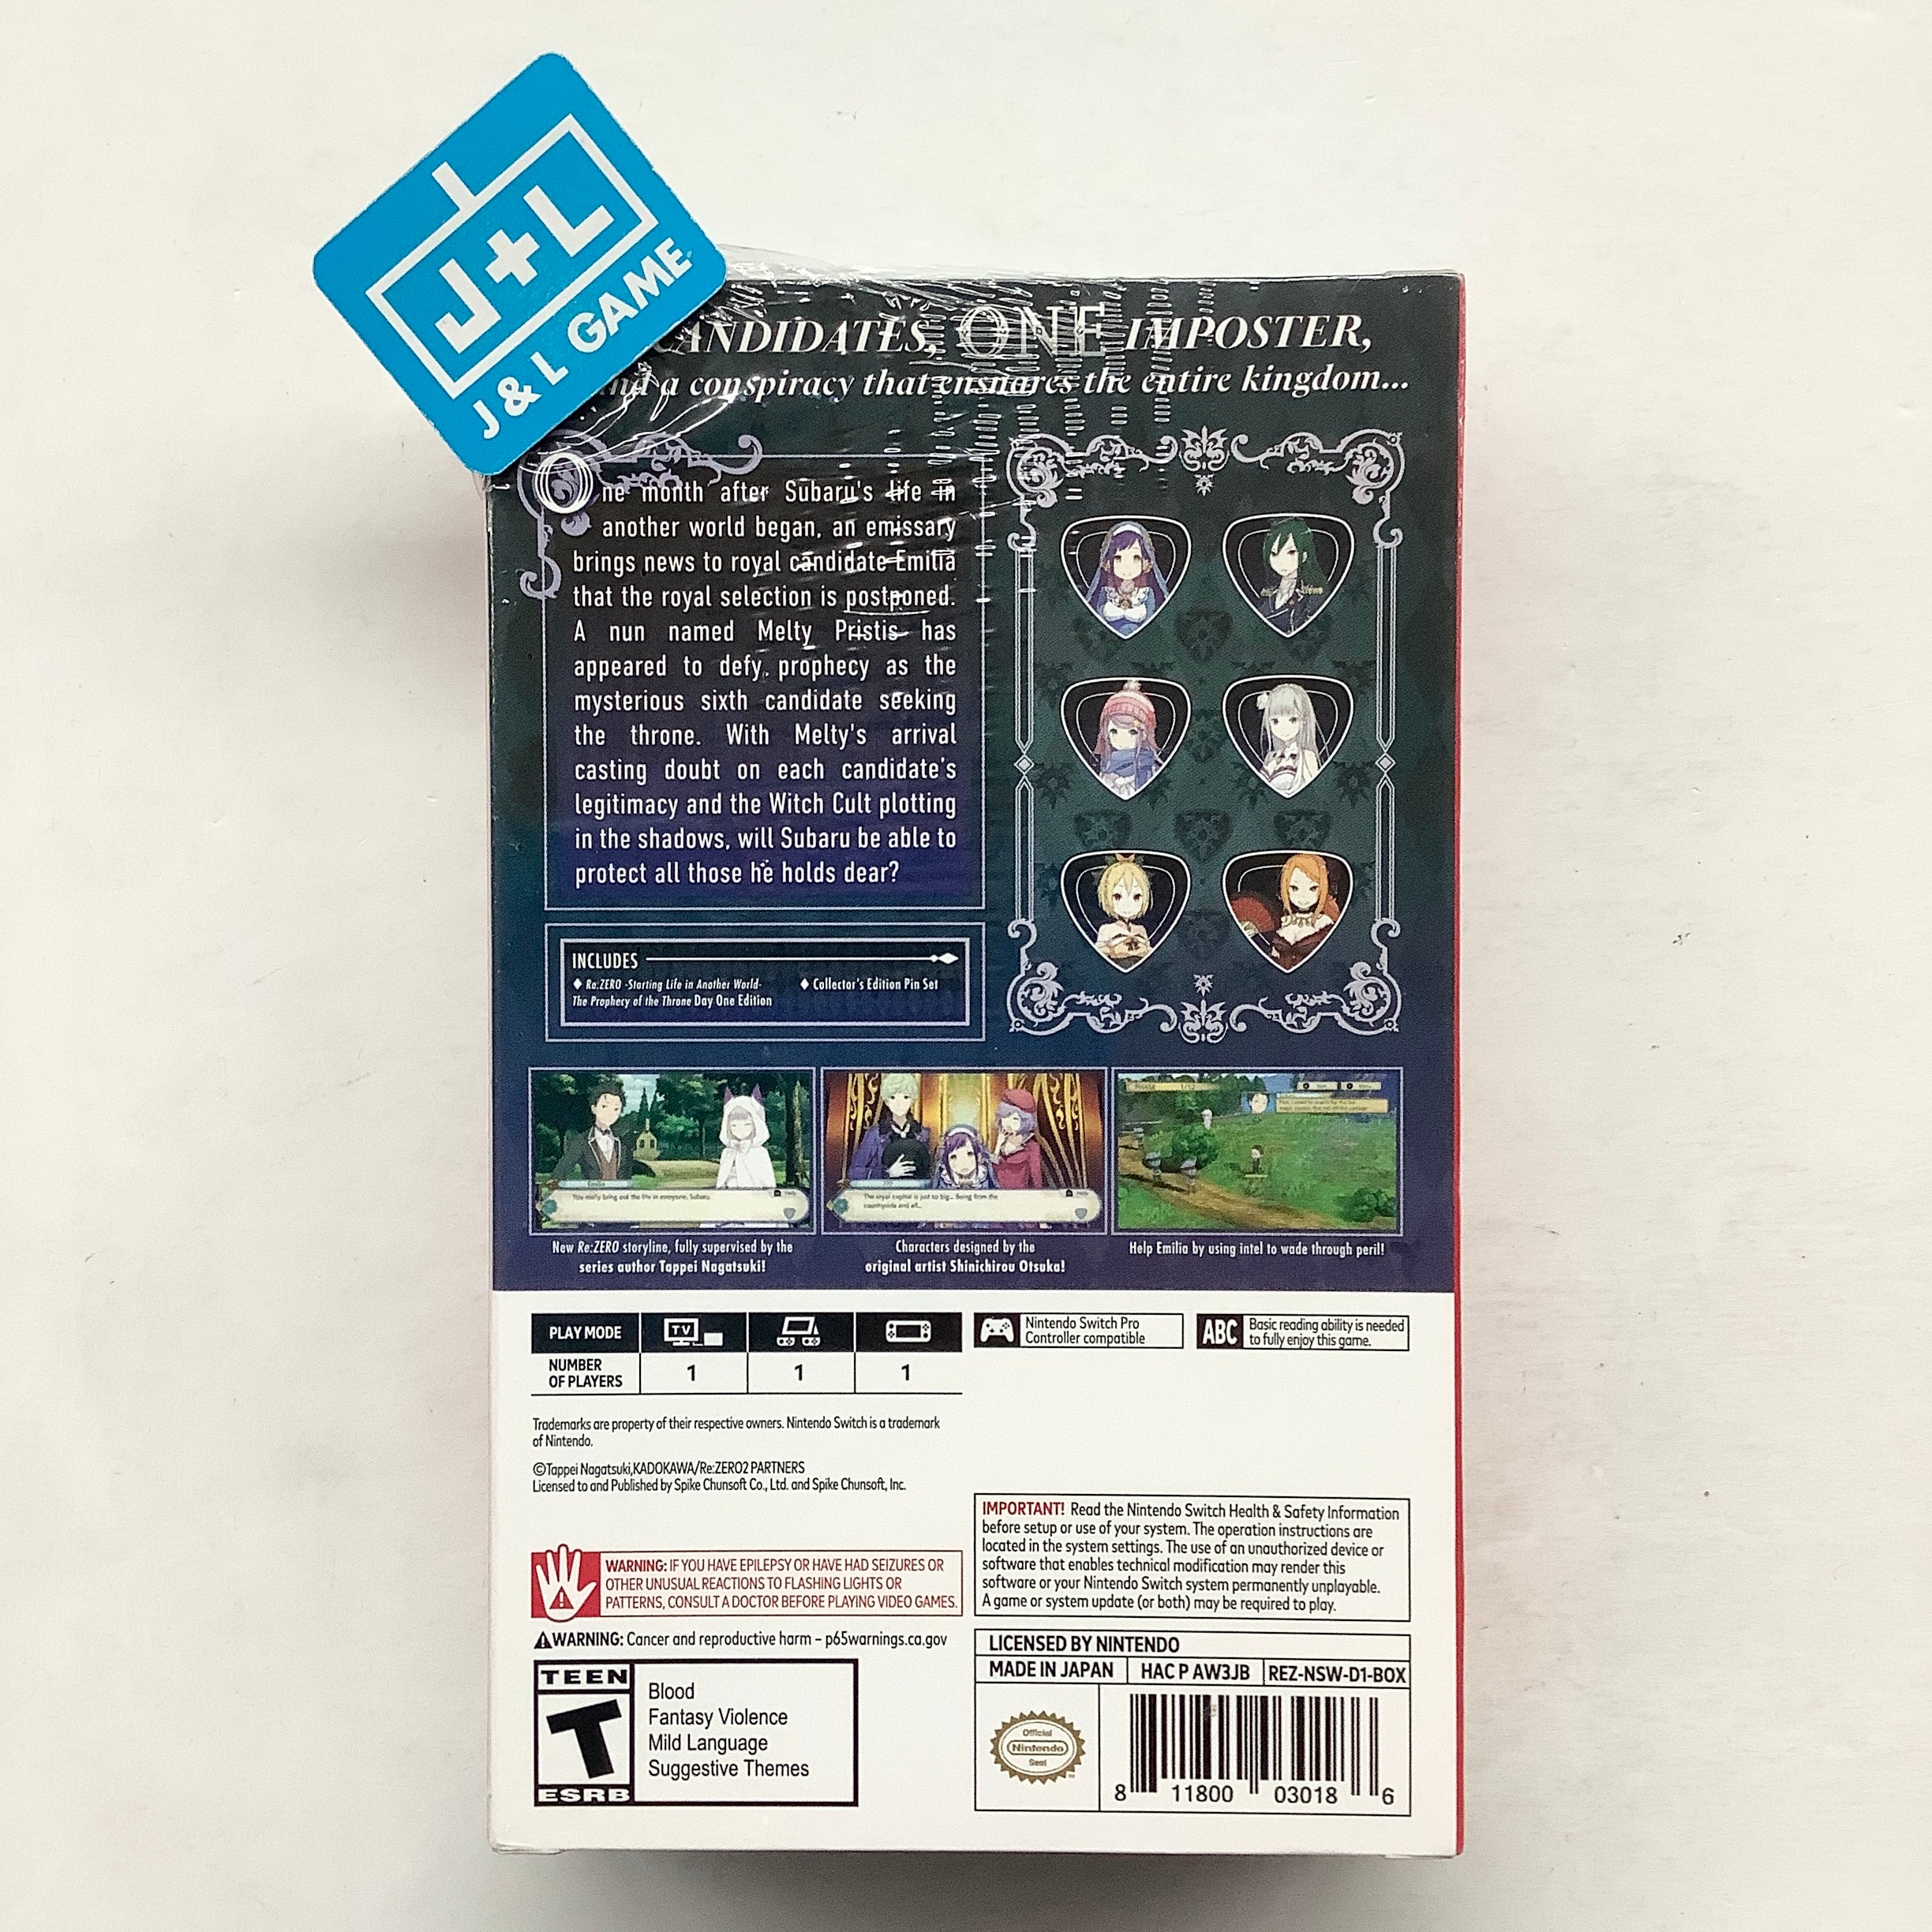 Re:ZERO – The Prophecy of the Throne Day One Edition – (NSW) Nintendo Switch Video Games Spike Chunsoft   